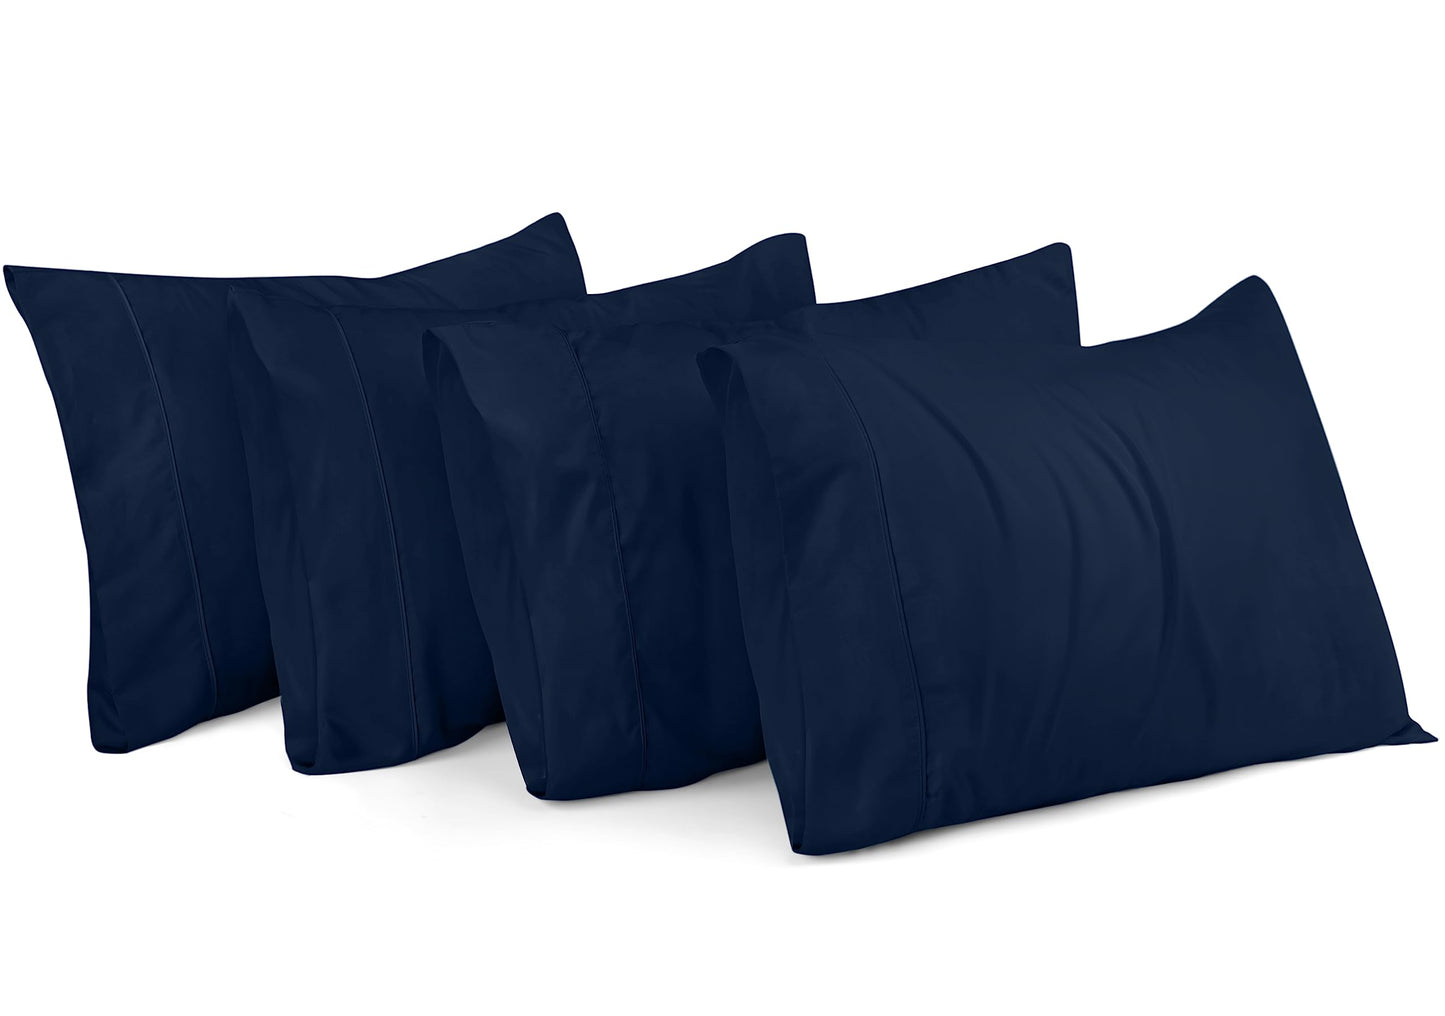 Utopia Bedding King Pillow Cases - 4 Pack - Envelope Closure - Soft Brushed Microfiber Fabric - Shrinkage and Fade Resistant Pillow Cases 20 X 40 (King, Navy)